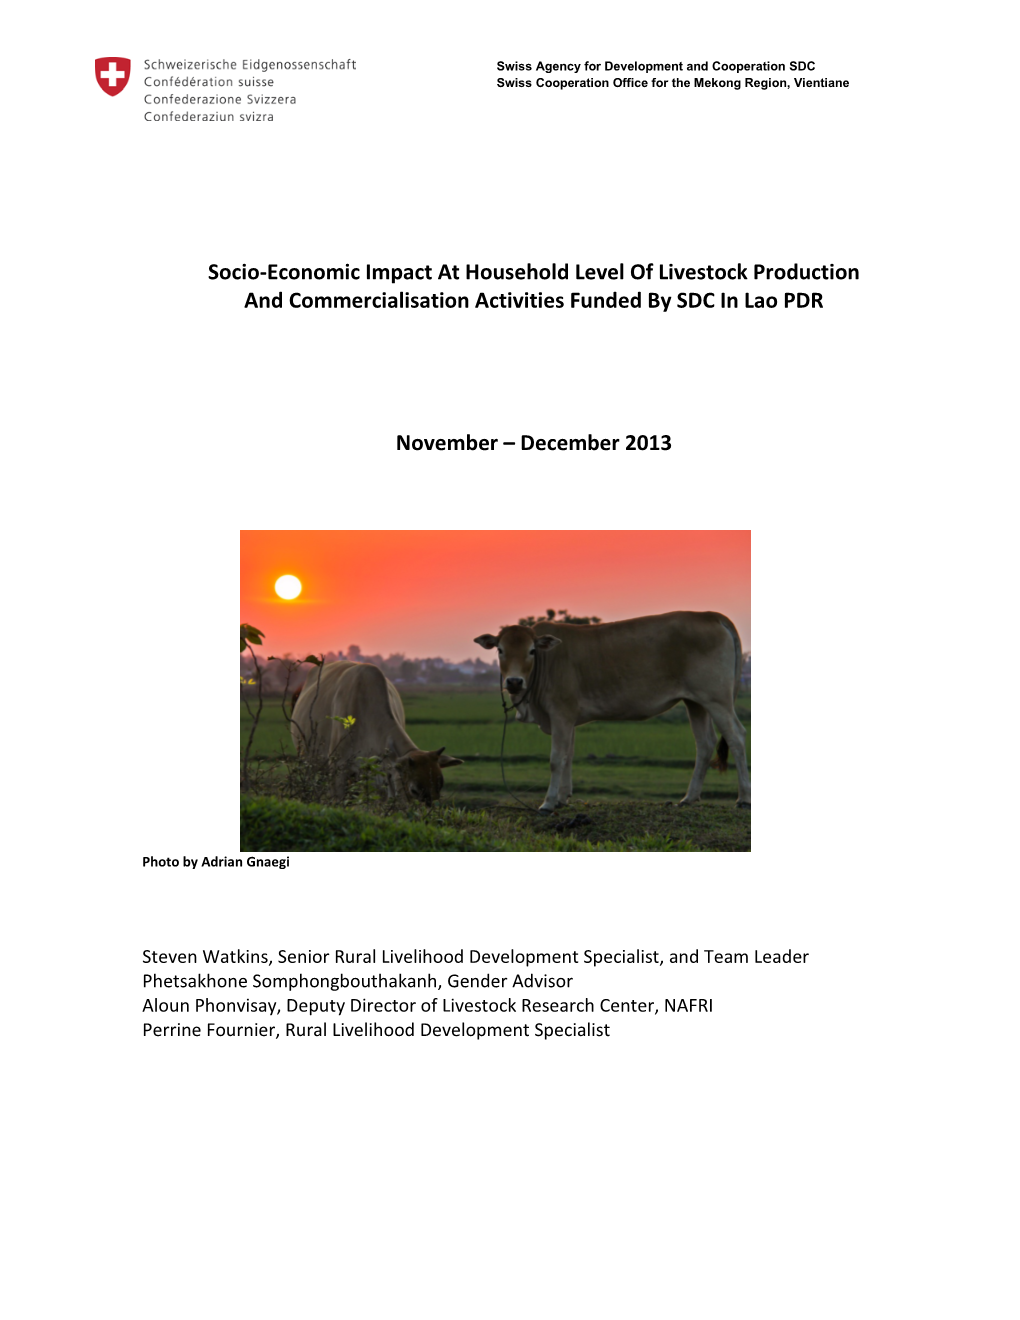 Socio-Economic Impact at Household Level of Livestock Production and Commercialisation Activities Funded by SDC in Lao PDR